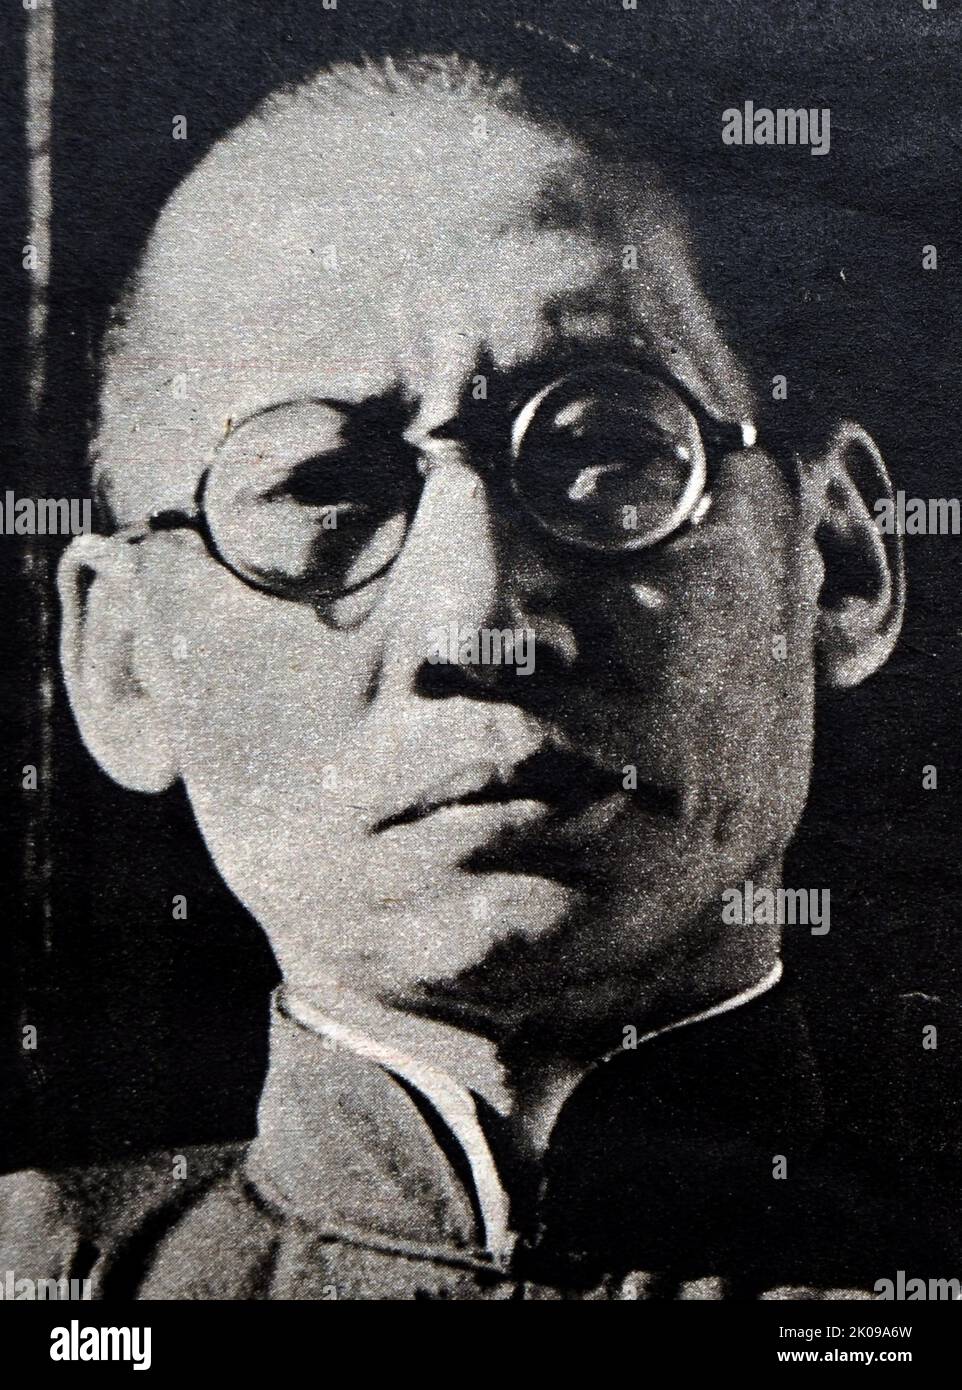 General Long Yun (27 November 1884 - 27 June 1962) was governor and warlord of the Chinese province of Yunnan from 1927 to October 1945, when he was overthrown in a coup (known as "The Kunming Incident") by Du Yuming under the order of Chiang Kai-shek. Stock Photo